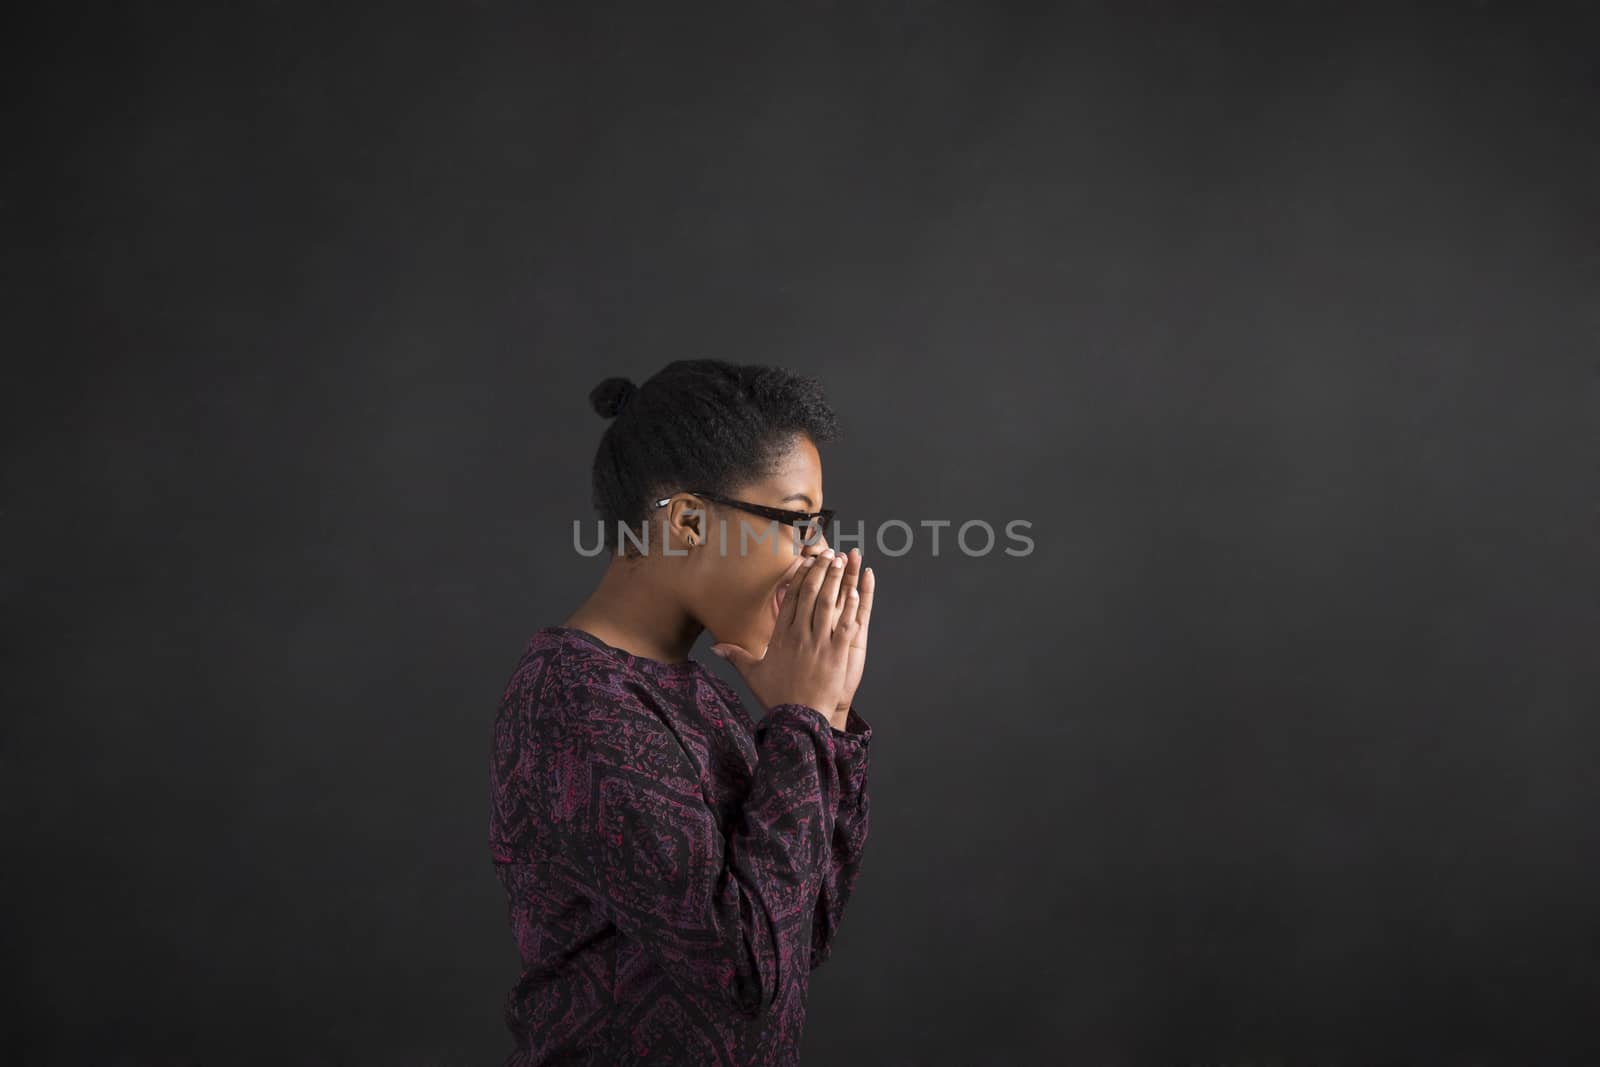 African woman shouting or screaming on blackboard background by alistaircotton